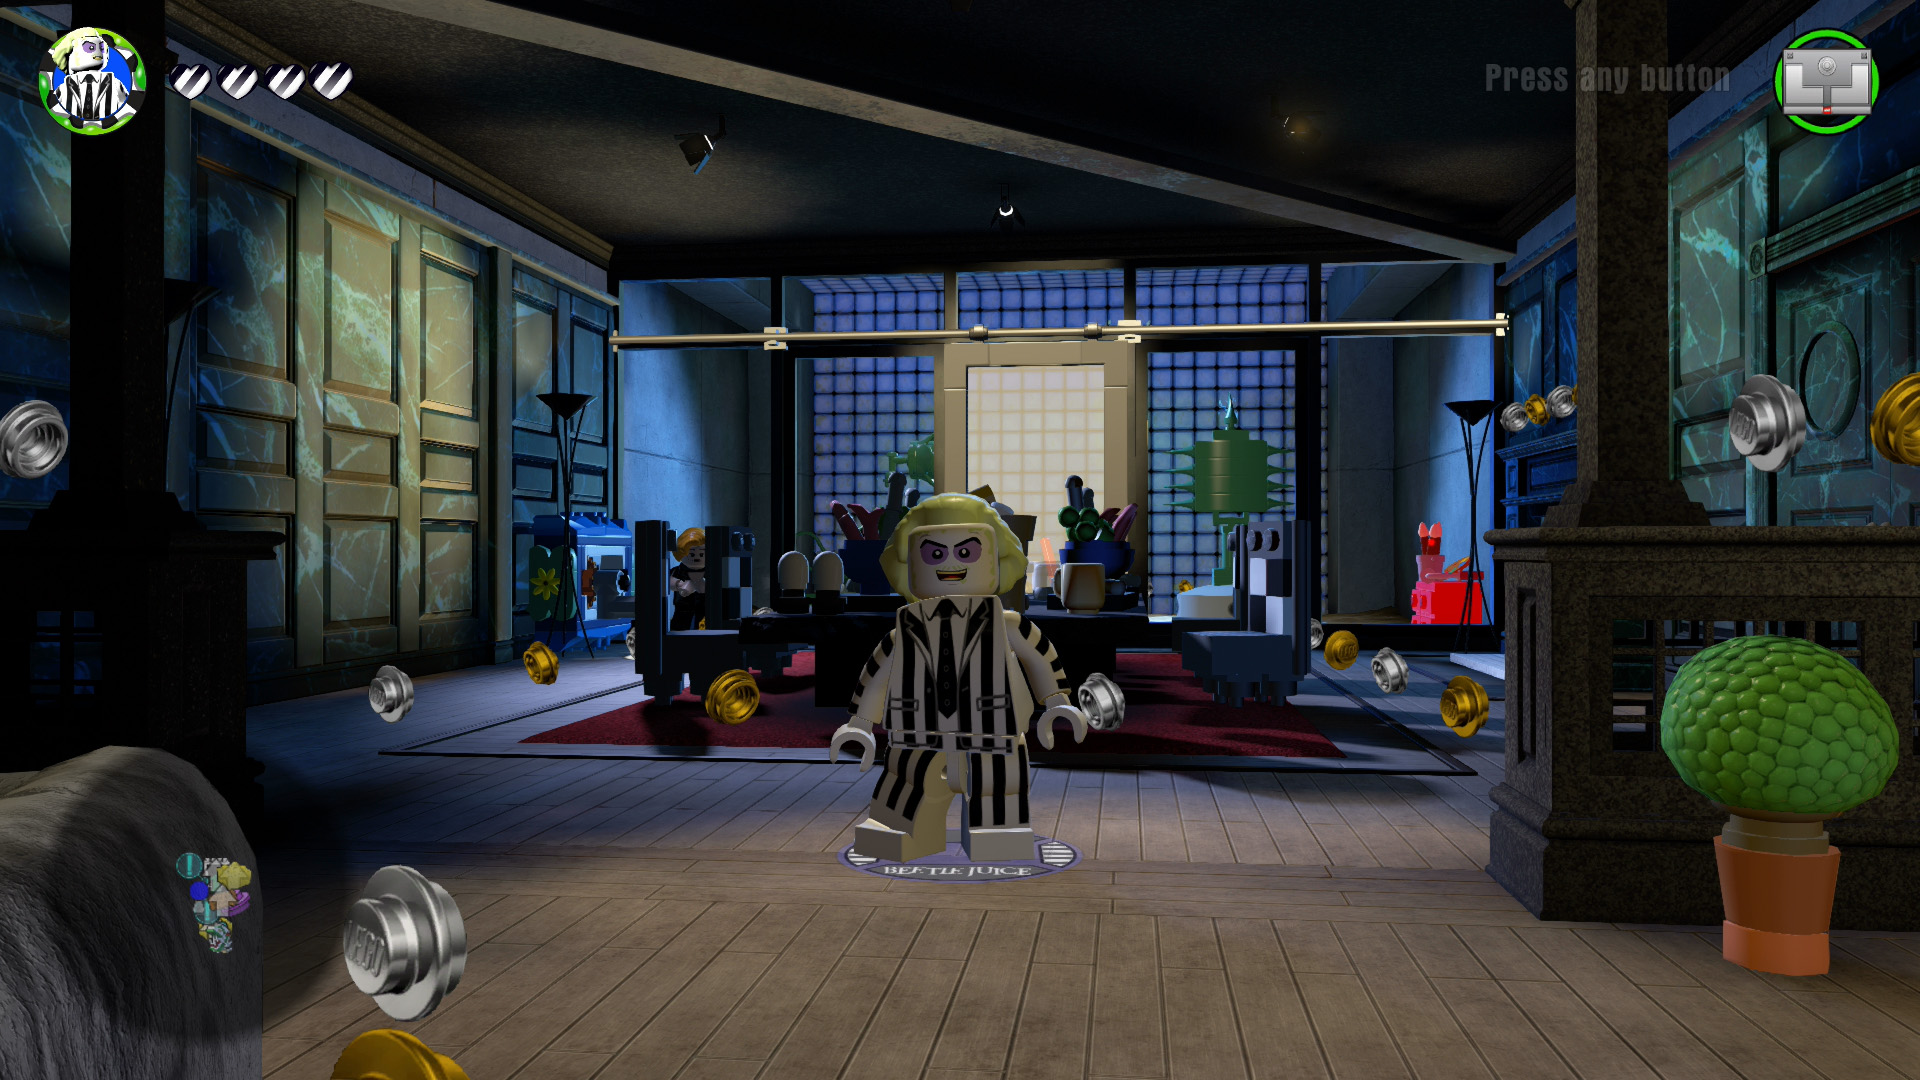 Lego Dimensions’ Second Year Ends Well